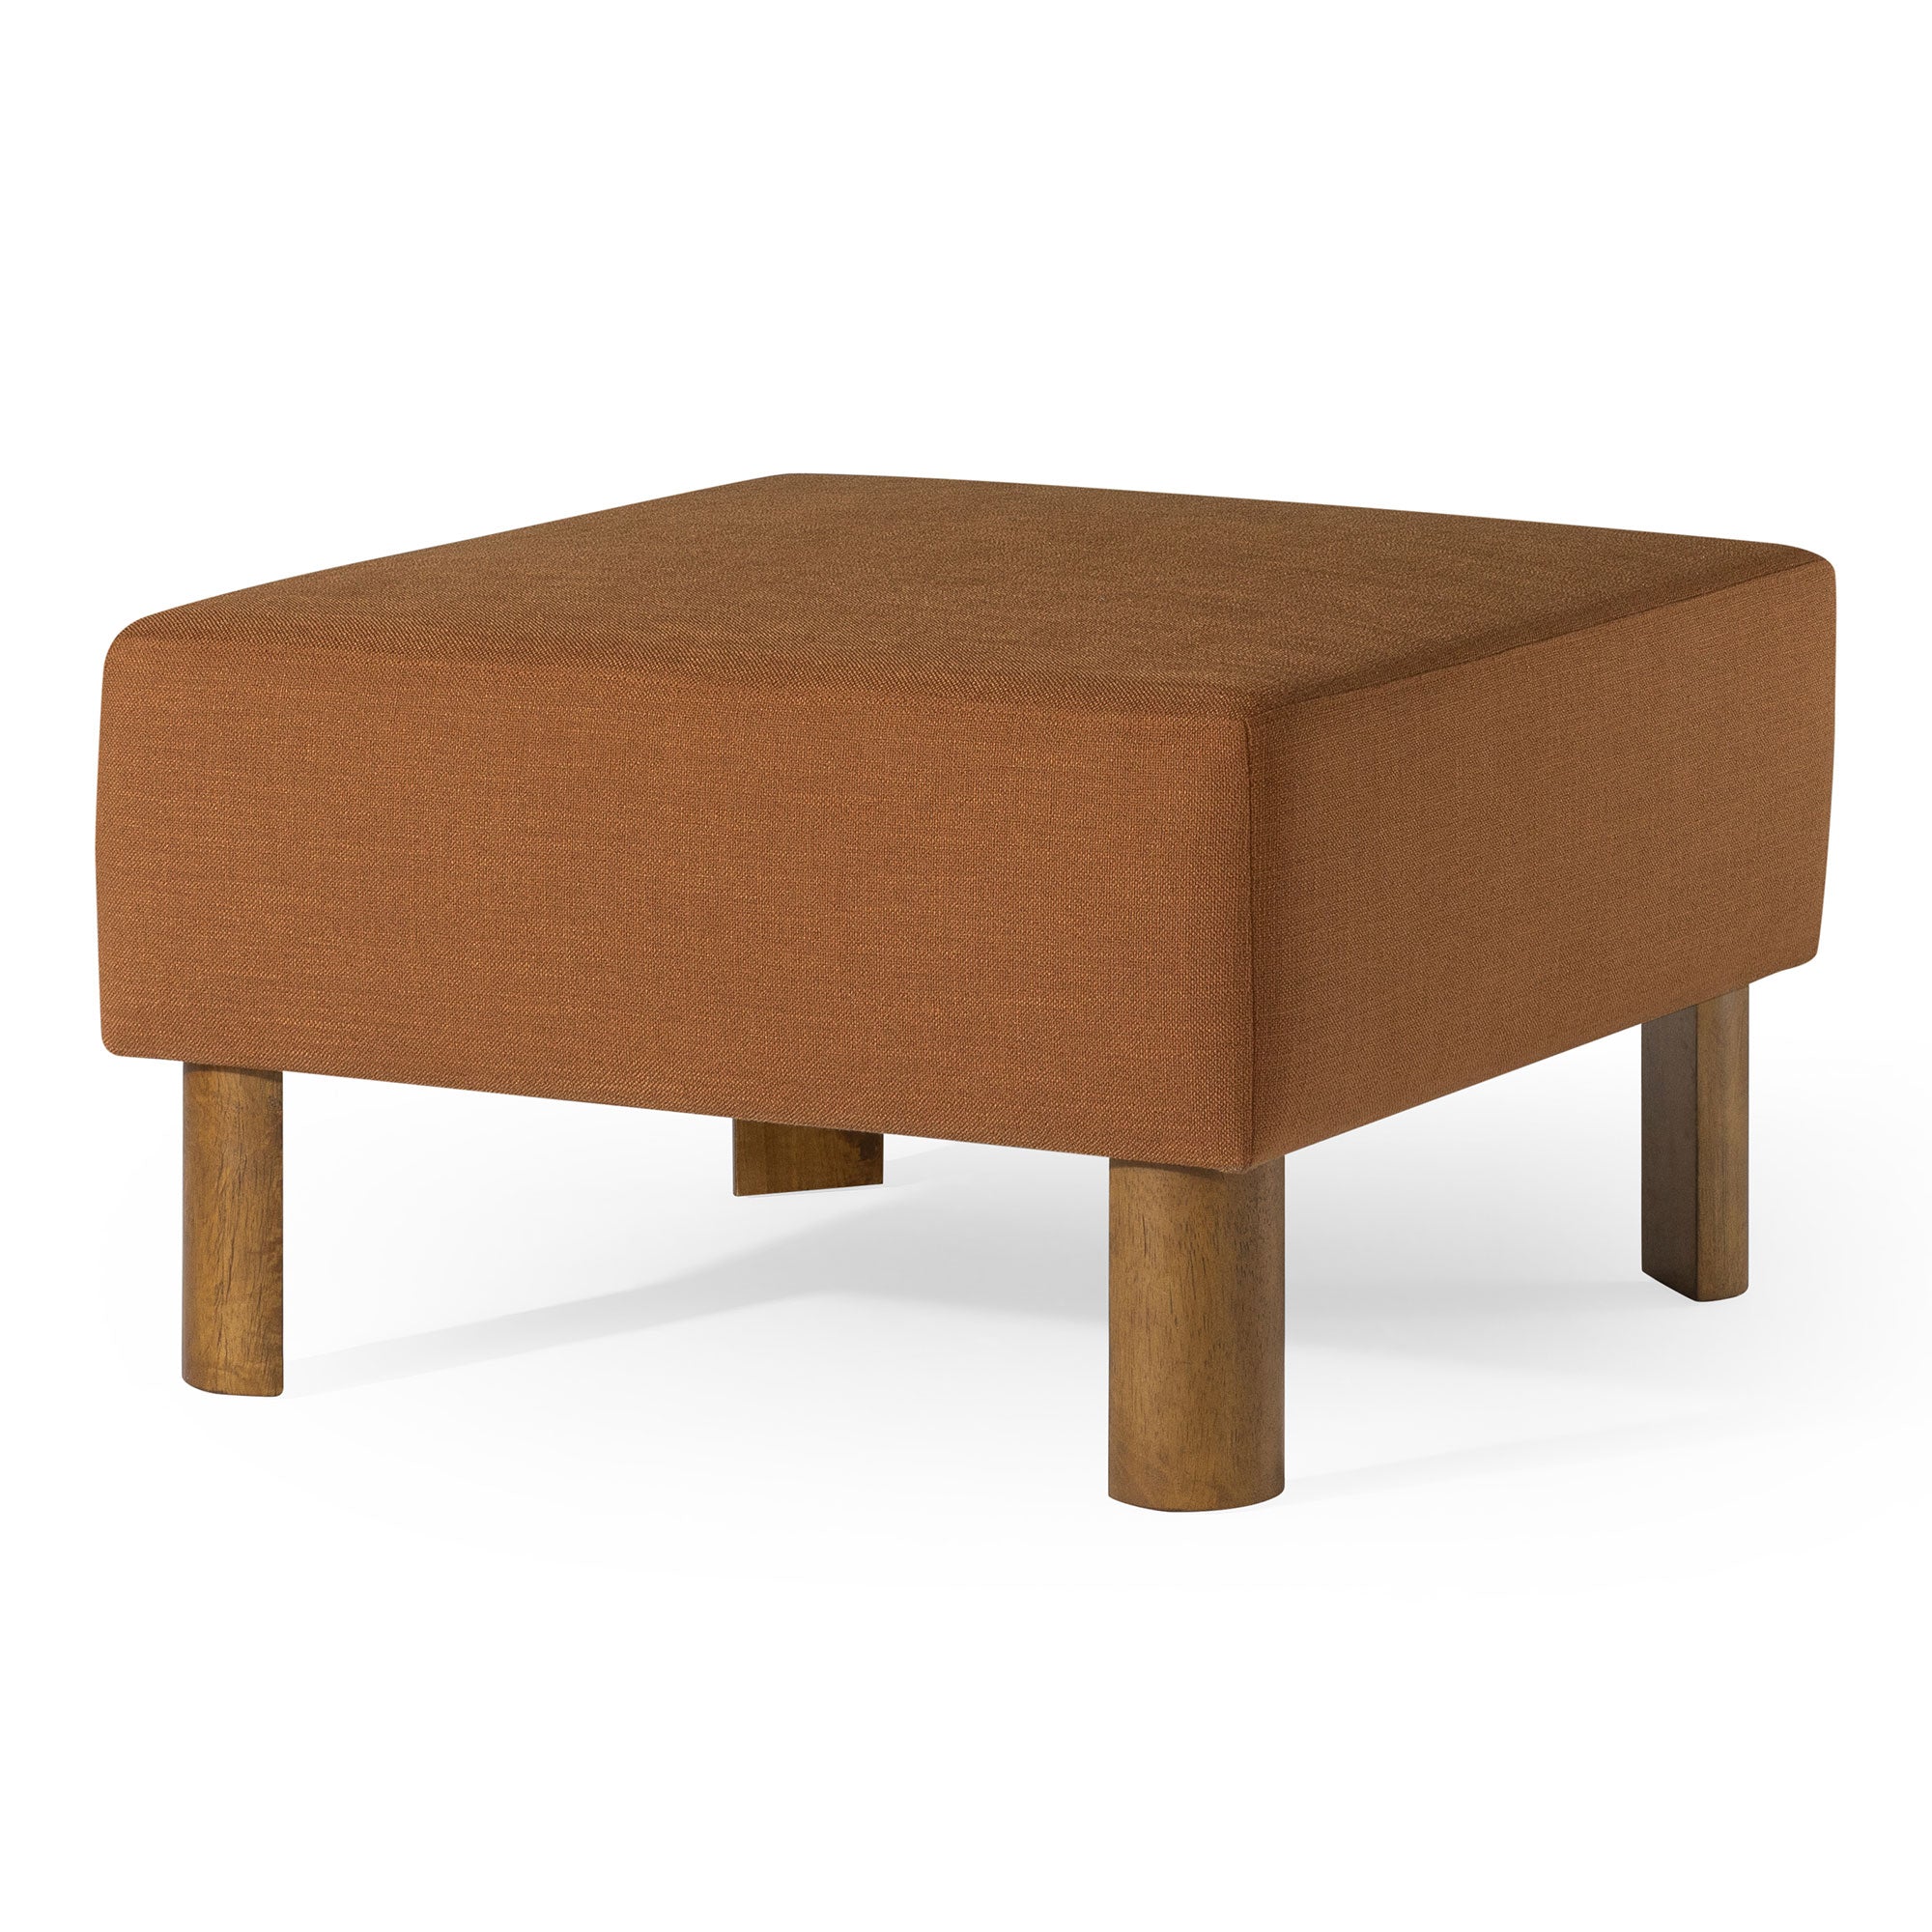 Maven-Lane-Lena-Contemporary-Upholstered-Ottoman-With-Refined-Brown-Wood-Finish-Ottomans-&-Poufs